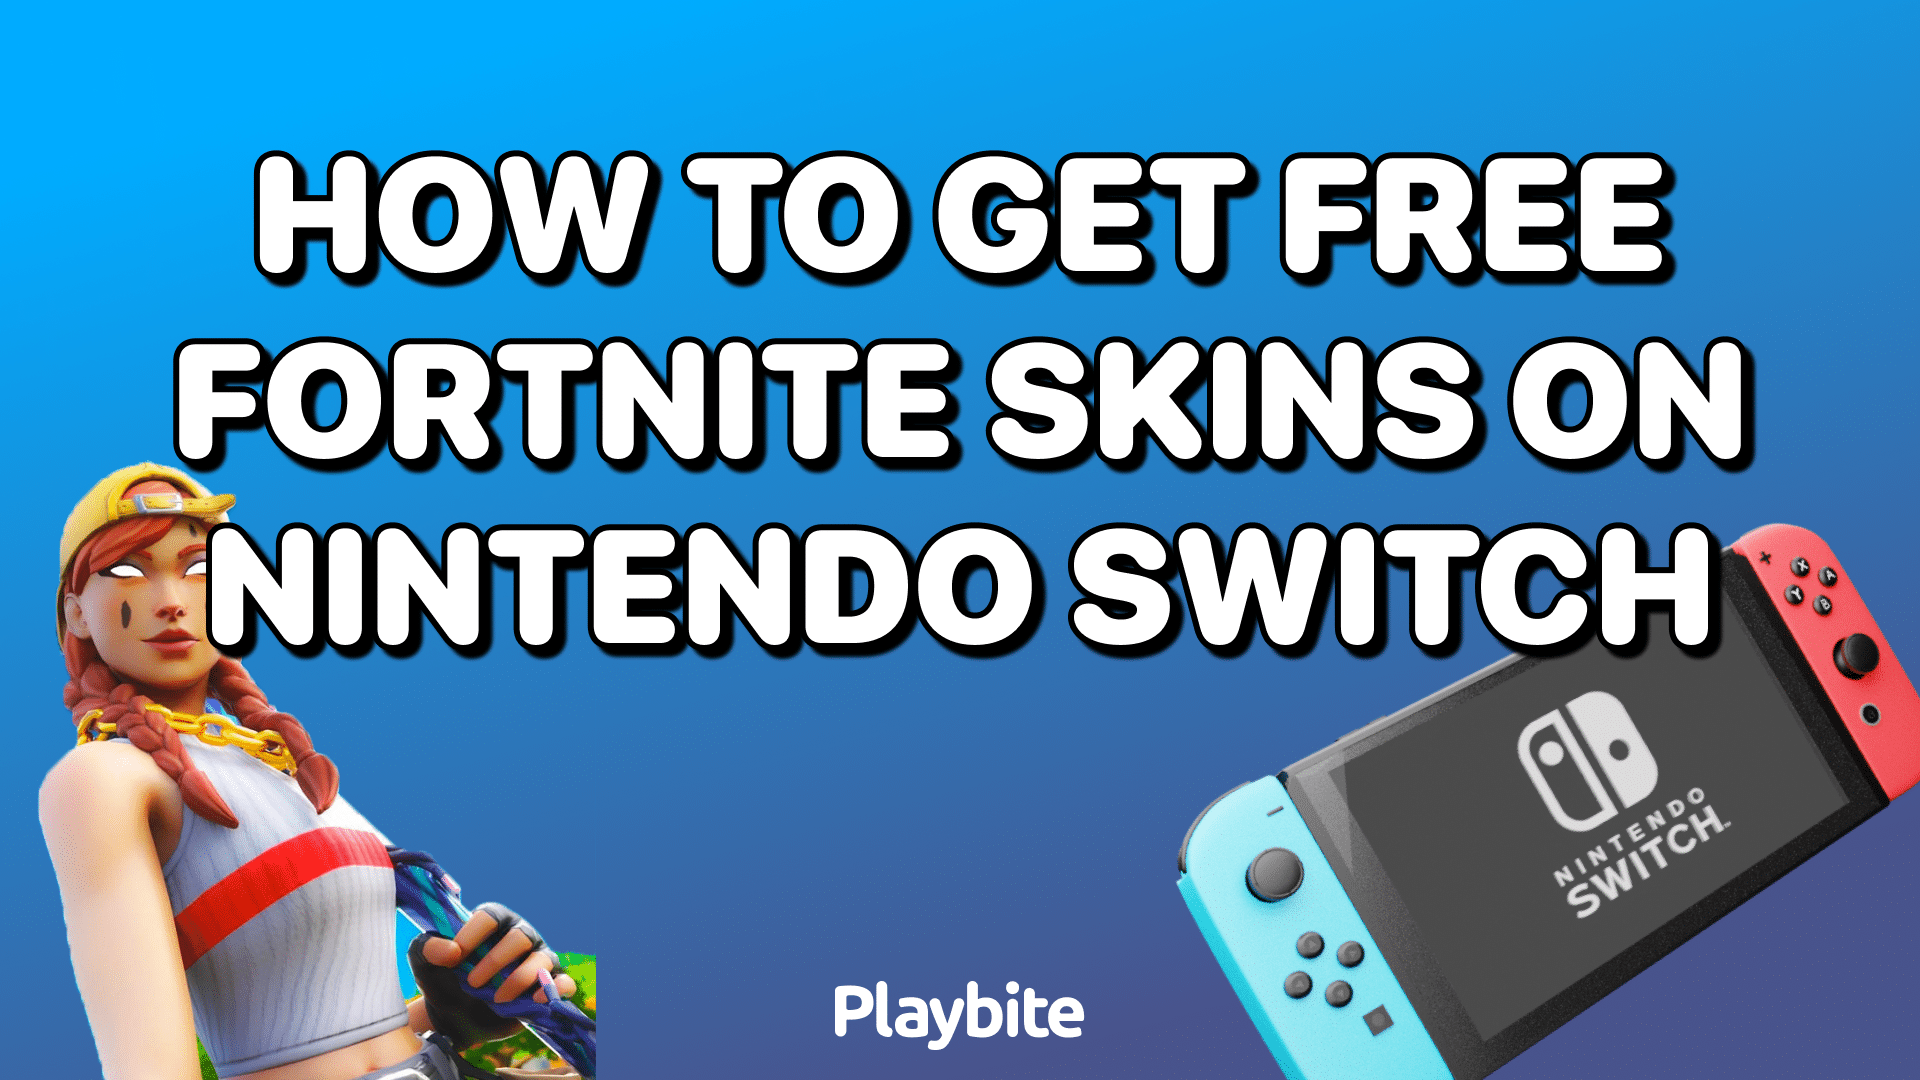 How To Get Free Fortnite Skins On Nintendo Switch - Playbite